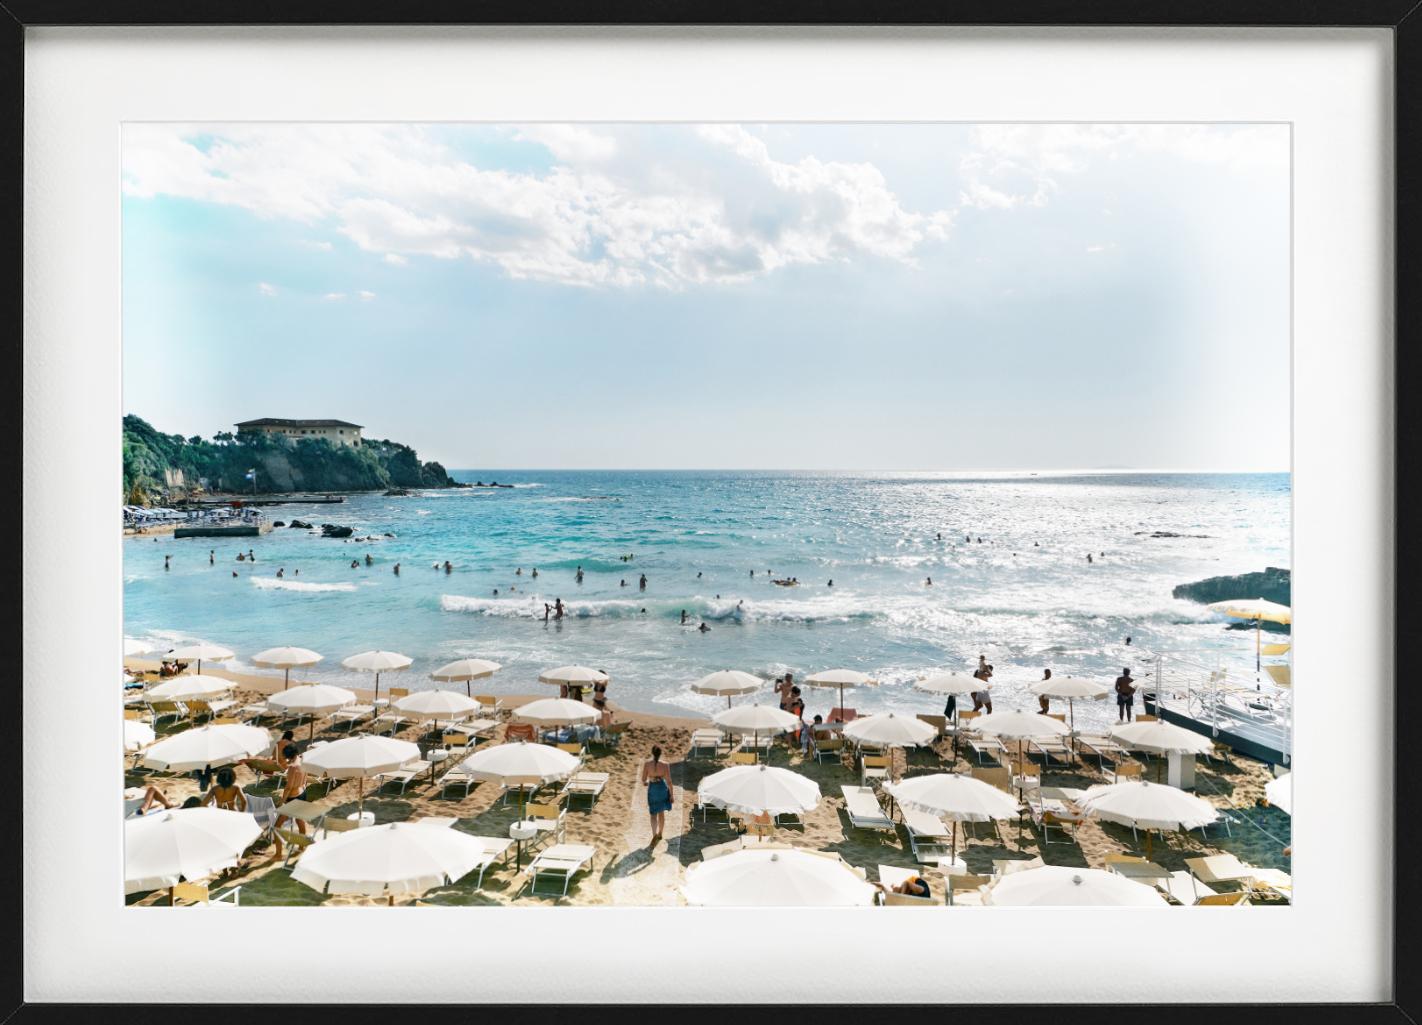 Quercetano Italy Due - Beach and Sea View with Umbrellas, People, and Mountains - Contemporary Photograph by Florian Innerkofler